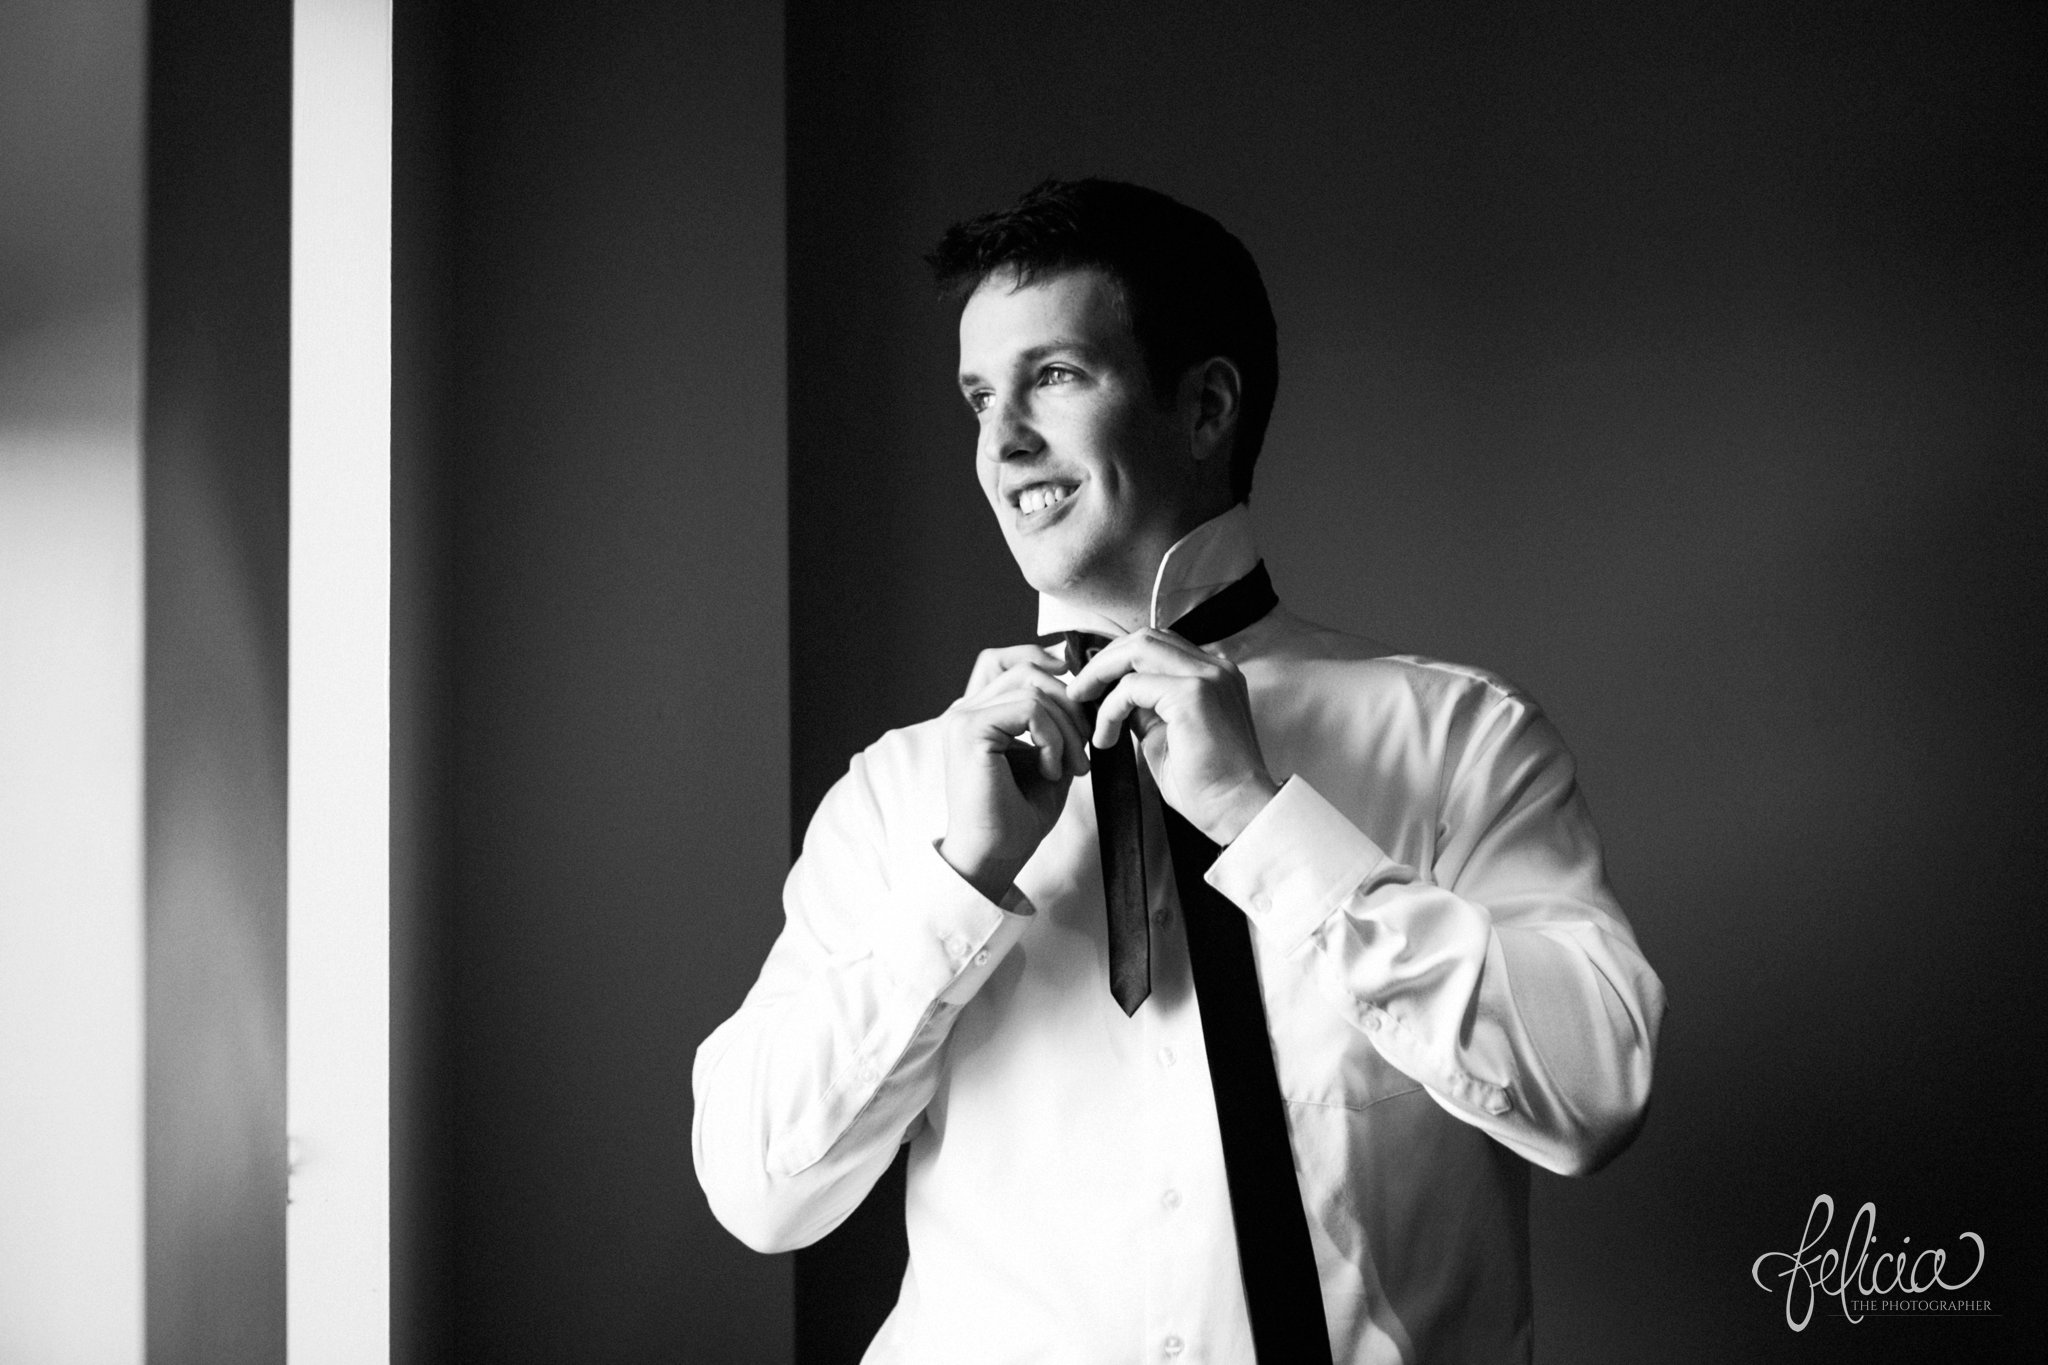 black and white | weddings | wedding photos | wedding photography | images by feliciathephotographer.com | St. Therese Catholic Church | Kansas City | downtown | The Terrace on Grand | wedding prep | getting ready | groom solo shot | groom getting ready | black tie | candid 